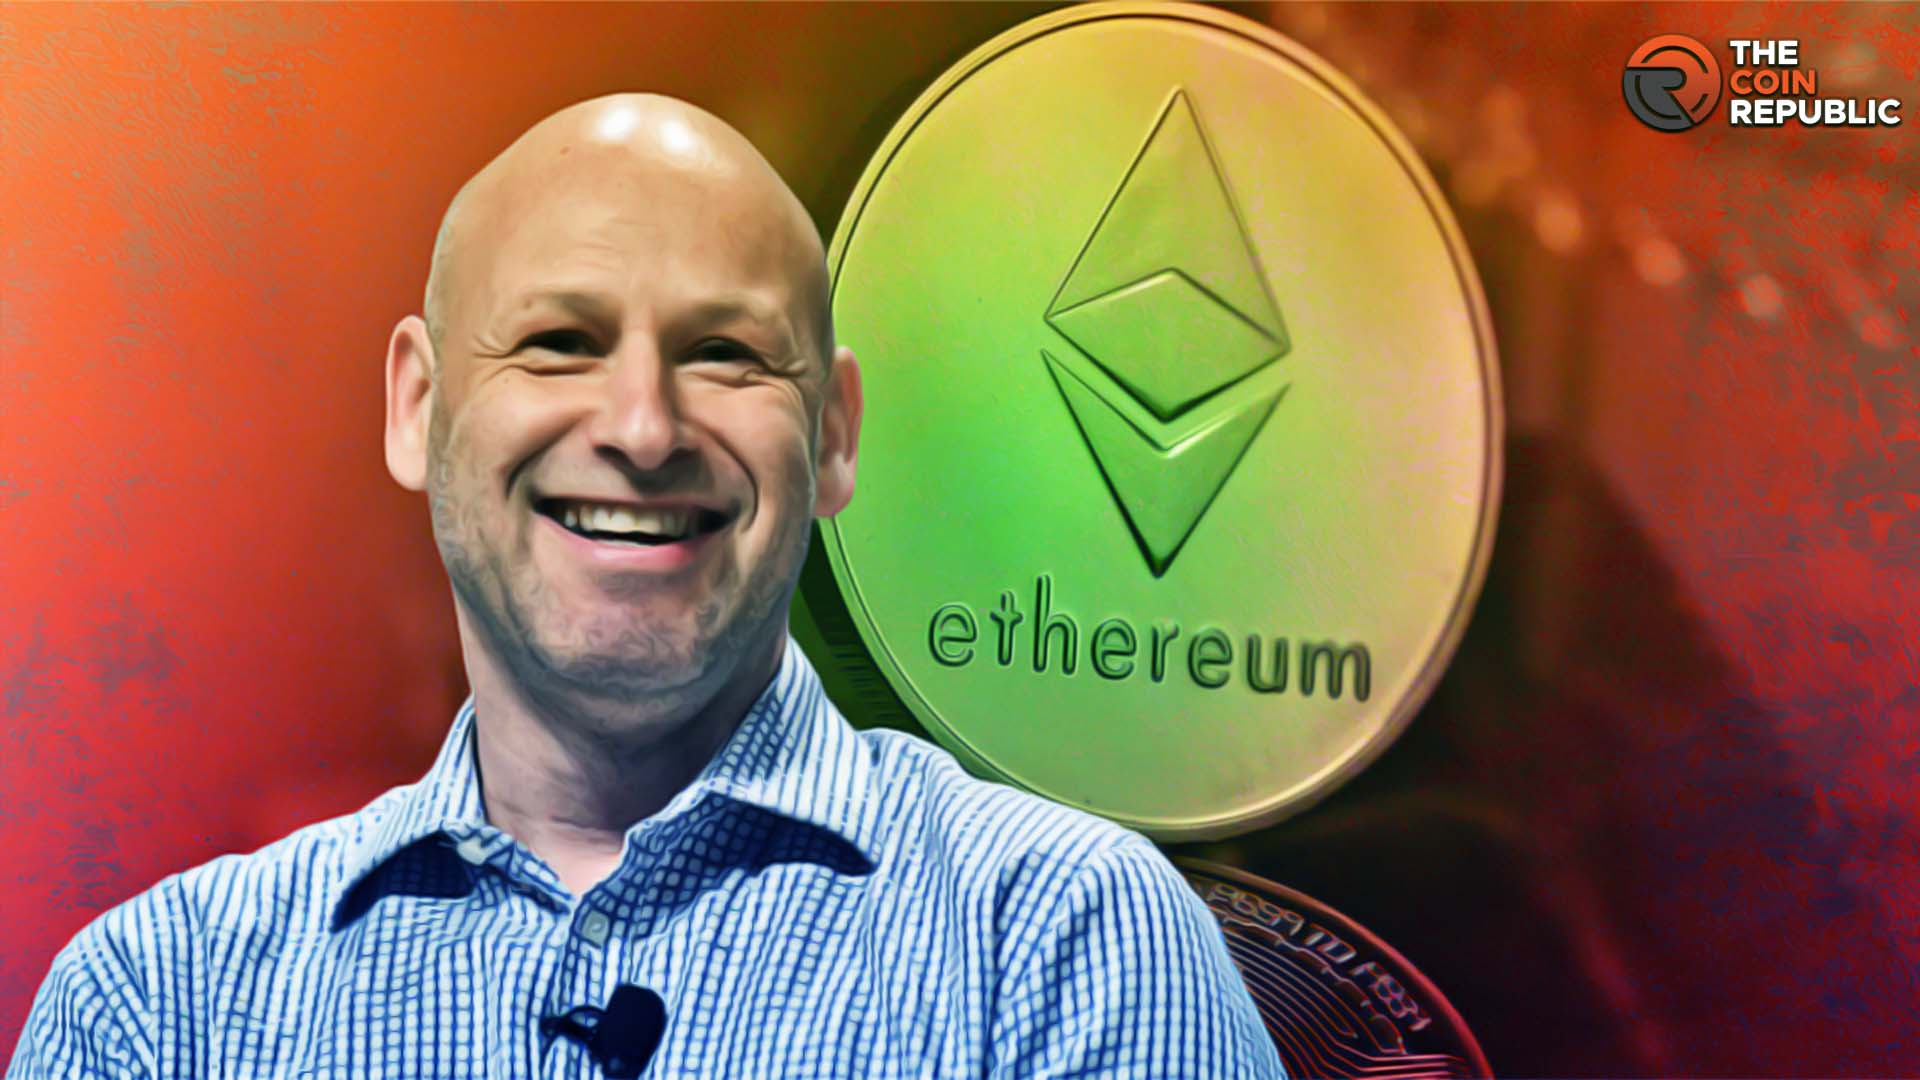 Ethereum Co-founder Joseph Lubin Says Eth Is a Commodity